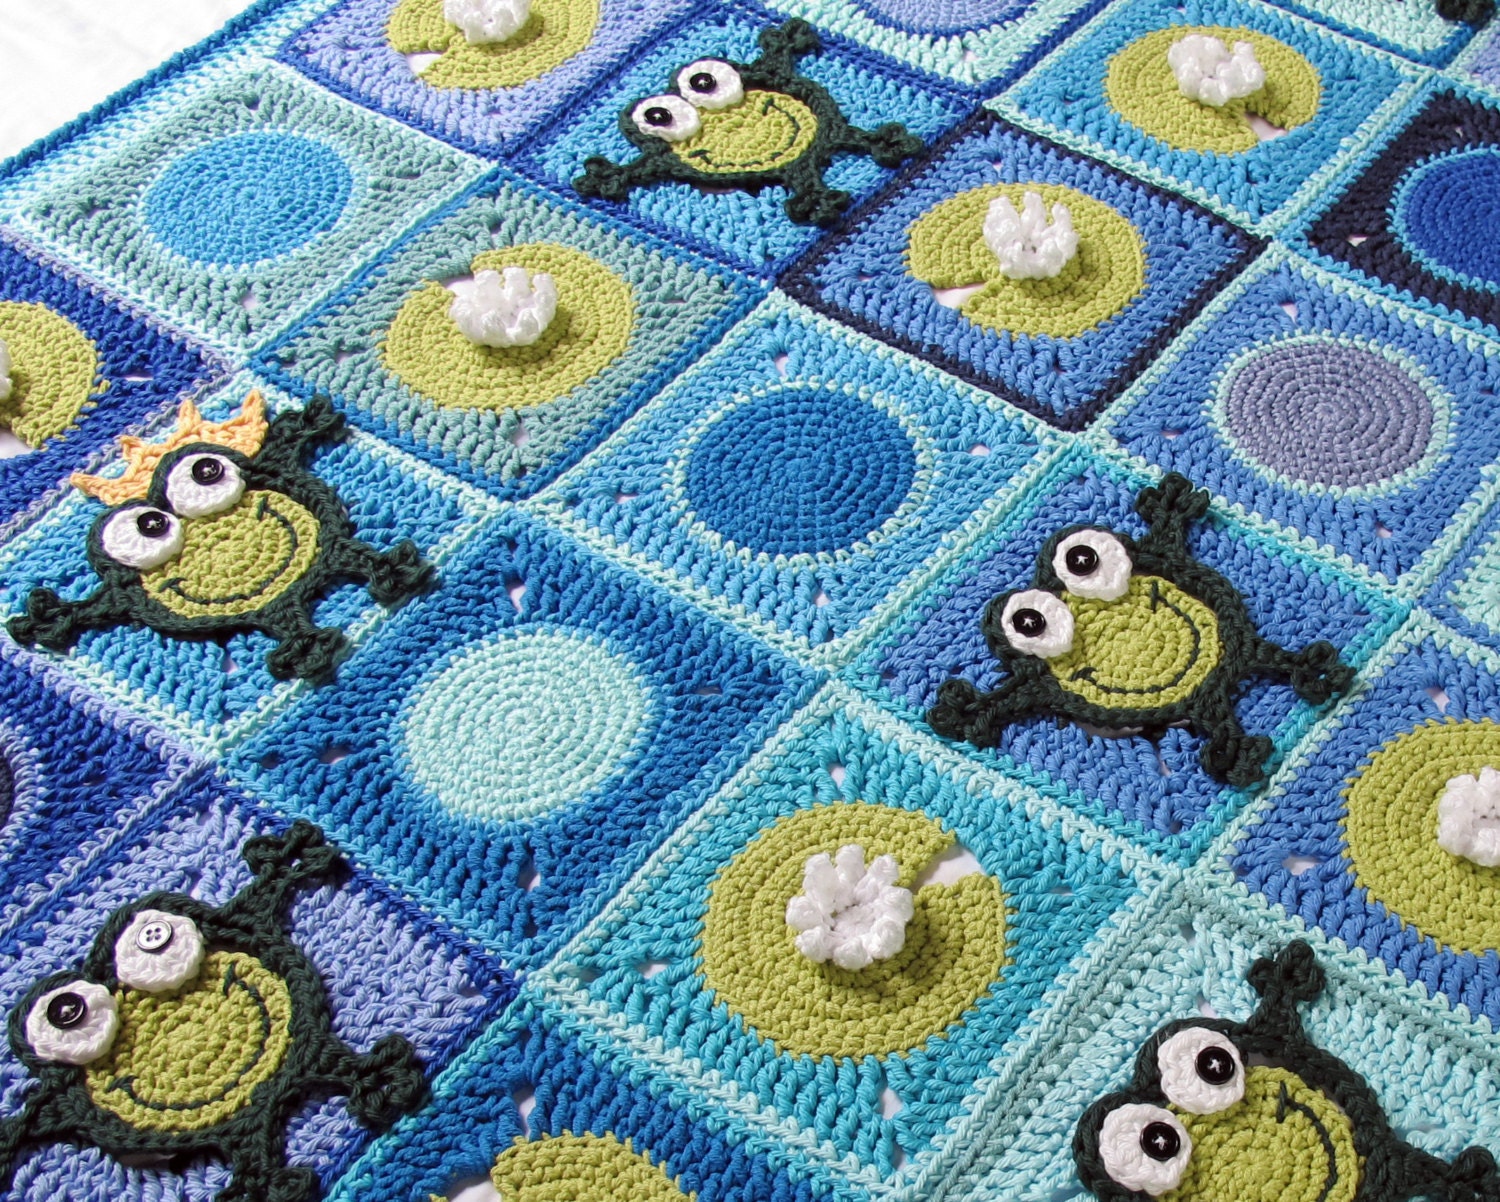 CROCHET PATTERN - Frog Frenzy - a Toadally Hoppy Frog blanket with lily pads - Instant PDF Download